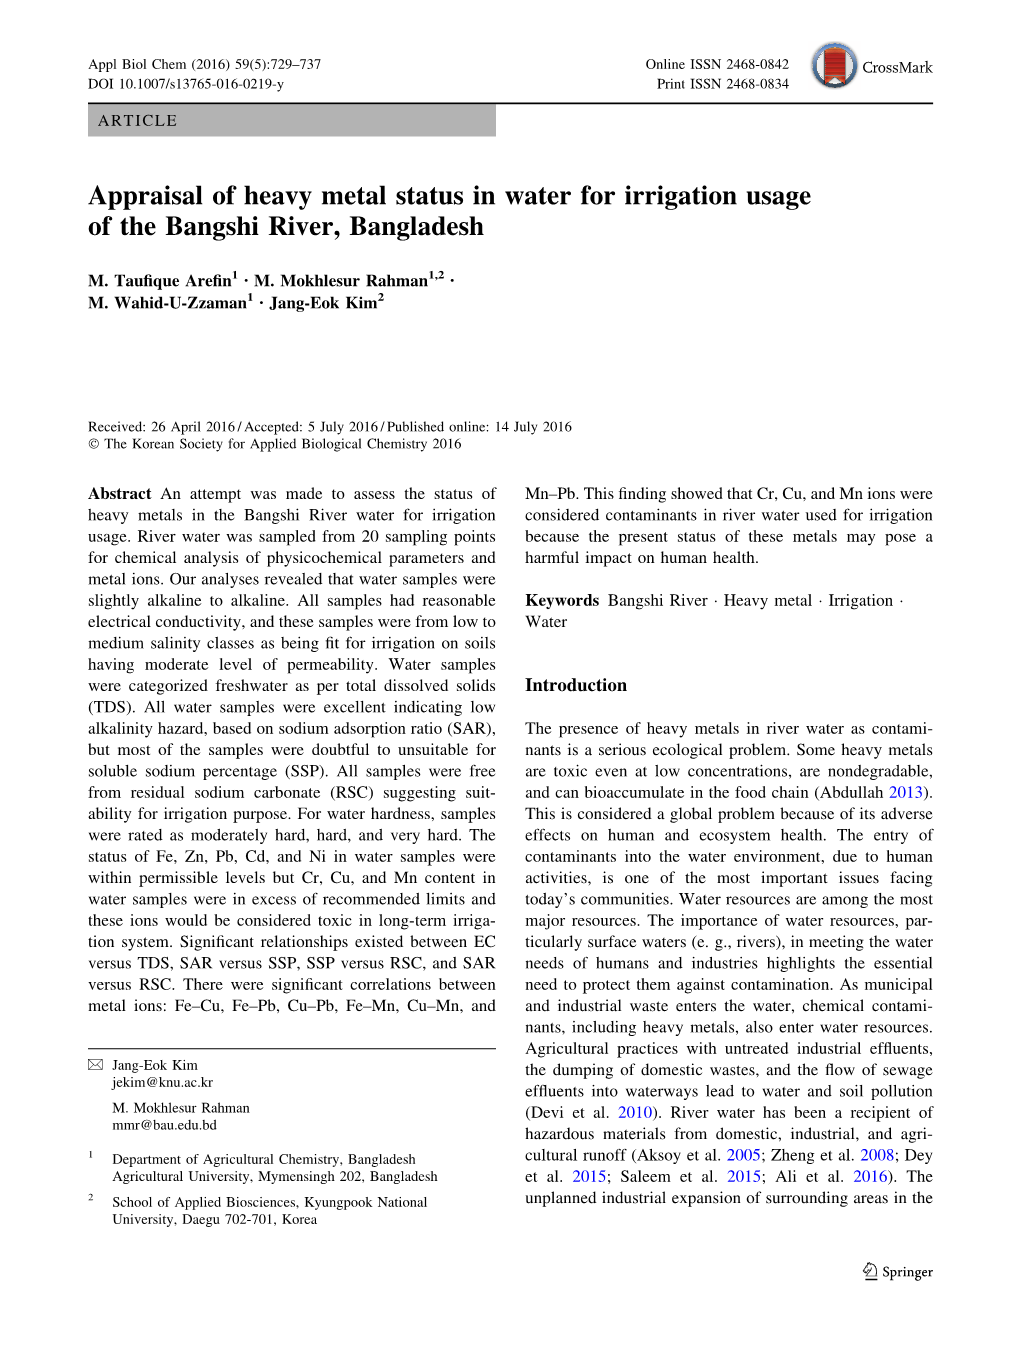 Appraisal of Heavy Metal Status in Water for Irrigation Usage of the Bangshi River, Bangladesh